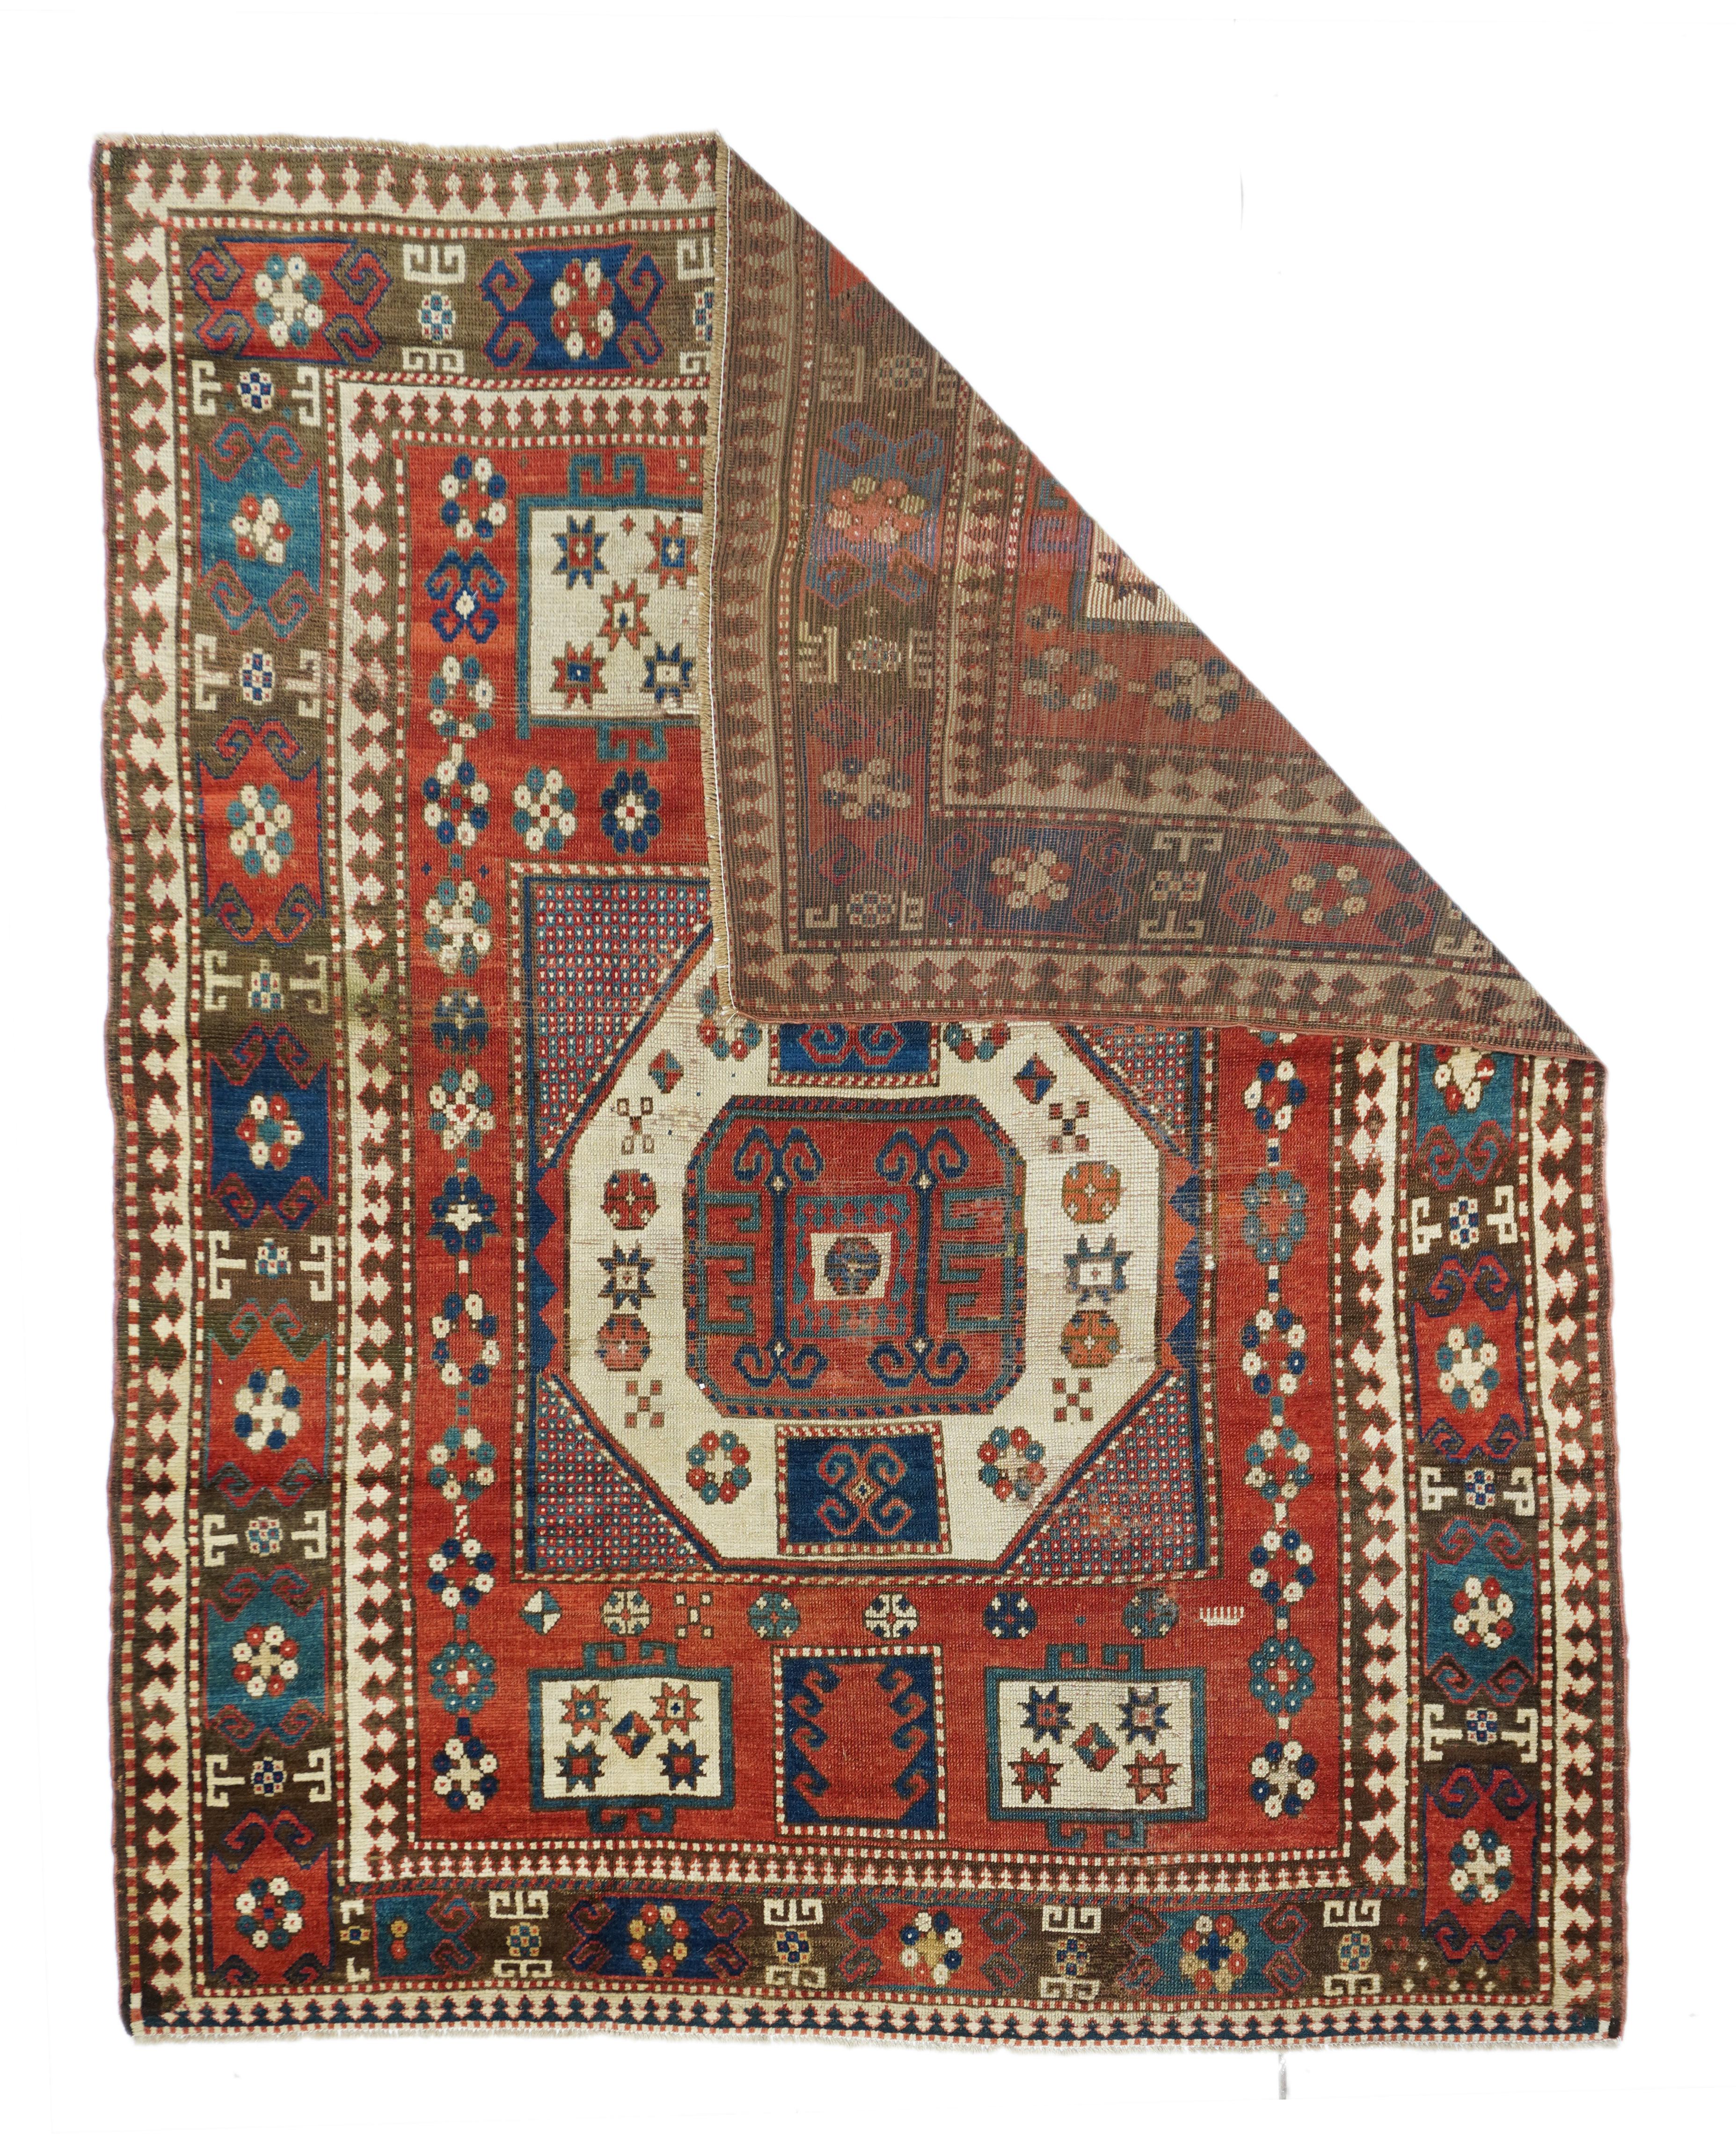 Antique Kazak Rug 5'7' ' x 7'4''. This amusingly stretched out SW Caucasian Armenian scatter show a tomato madder red field with a characteristic cream octagon with small chessboard mosaic corners. The weaver had extra loom space toward one end and